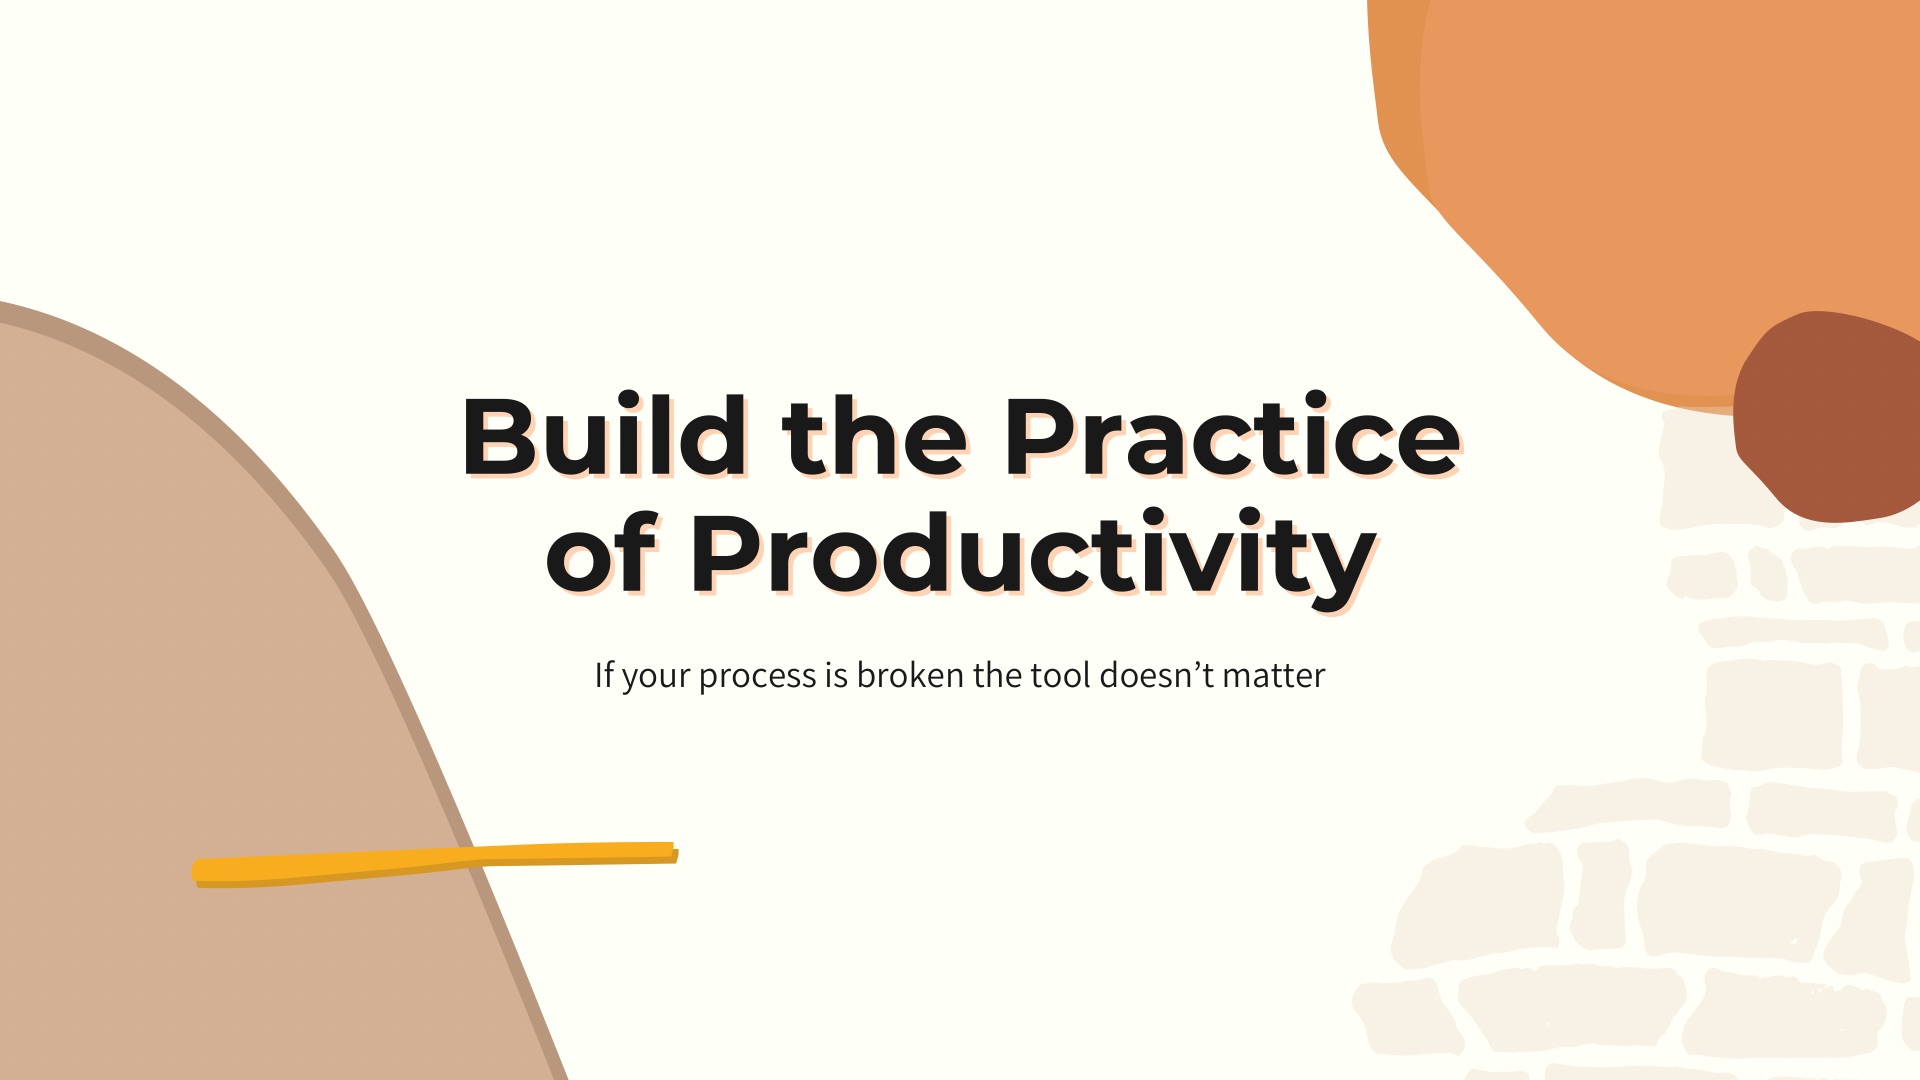 Building the Practice of Productivity